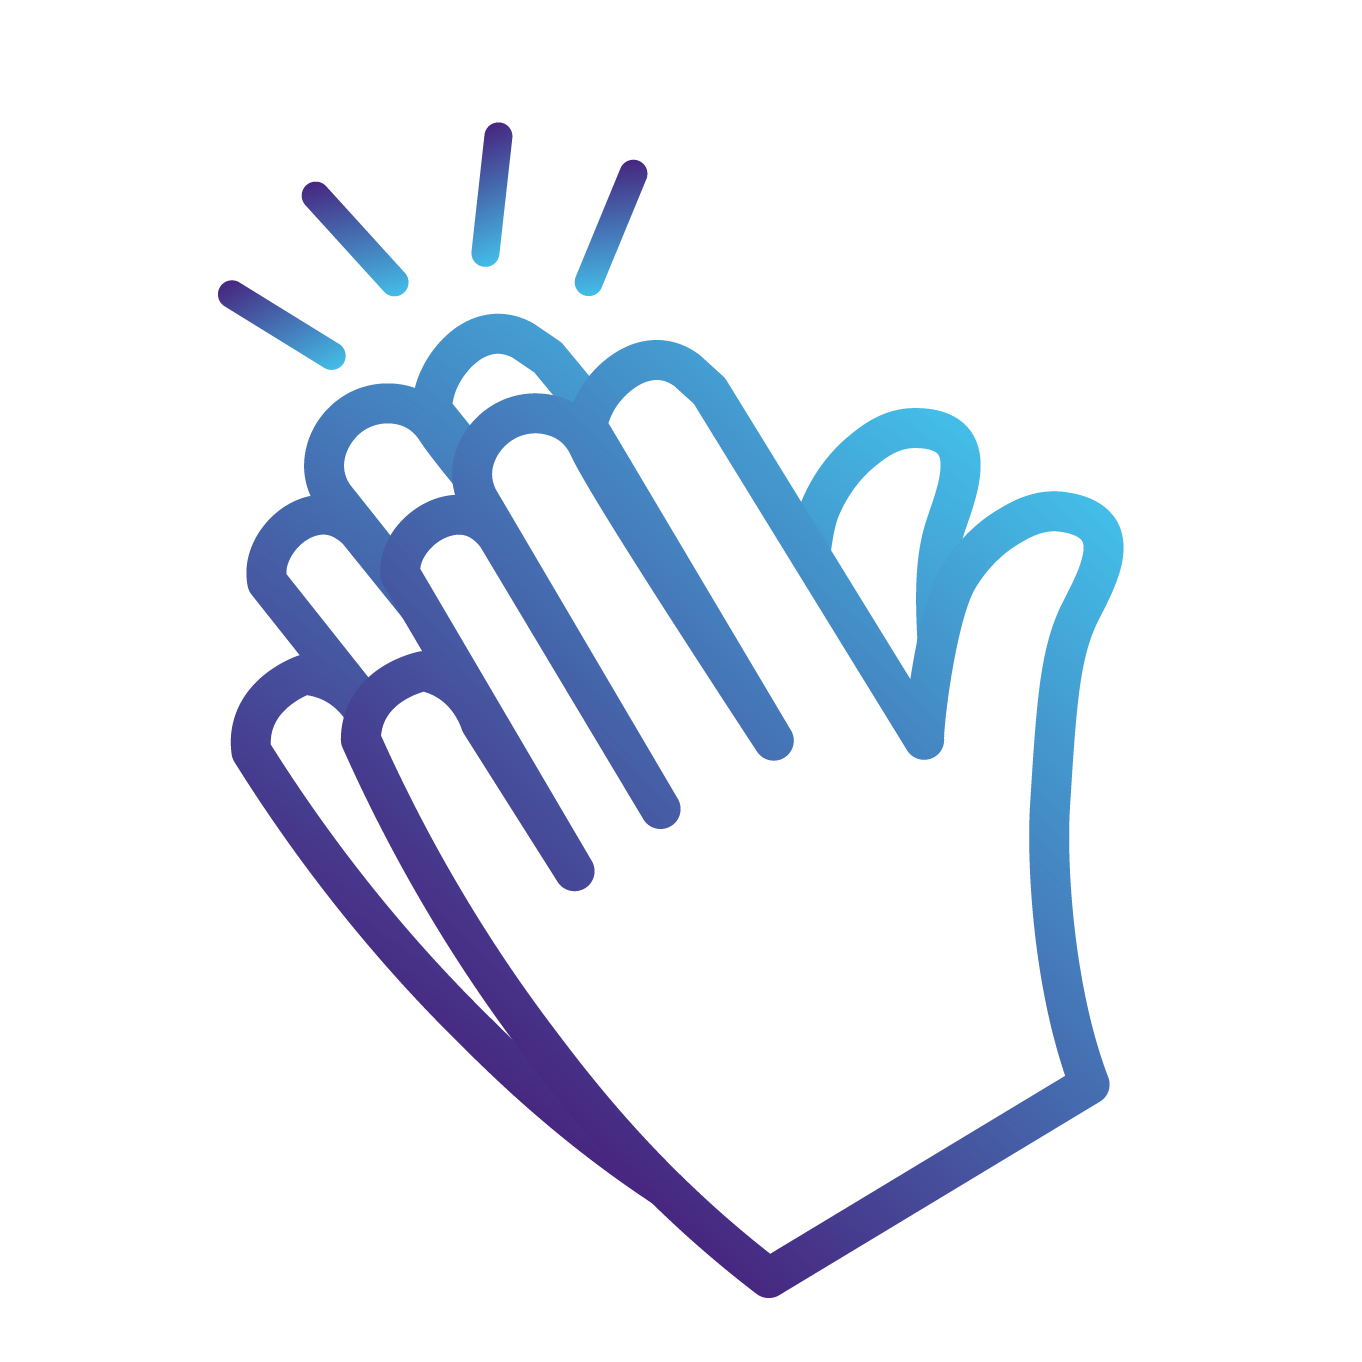 clapping hands icons